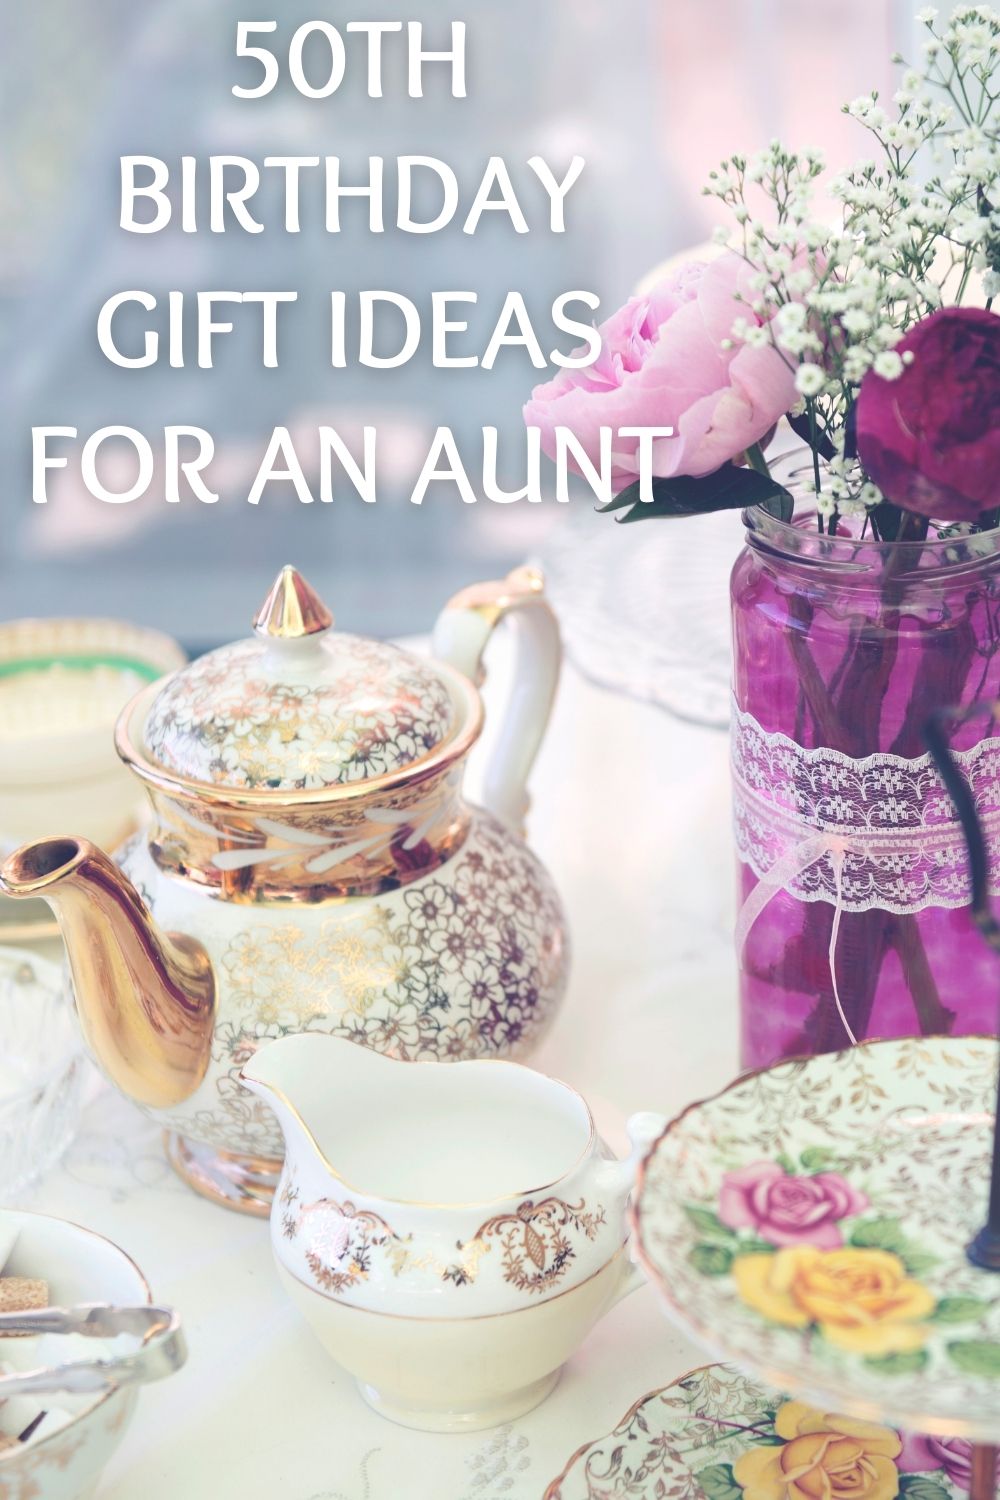 50th birthday gift ideas for an aunt